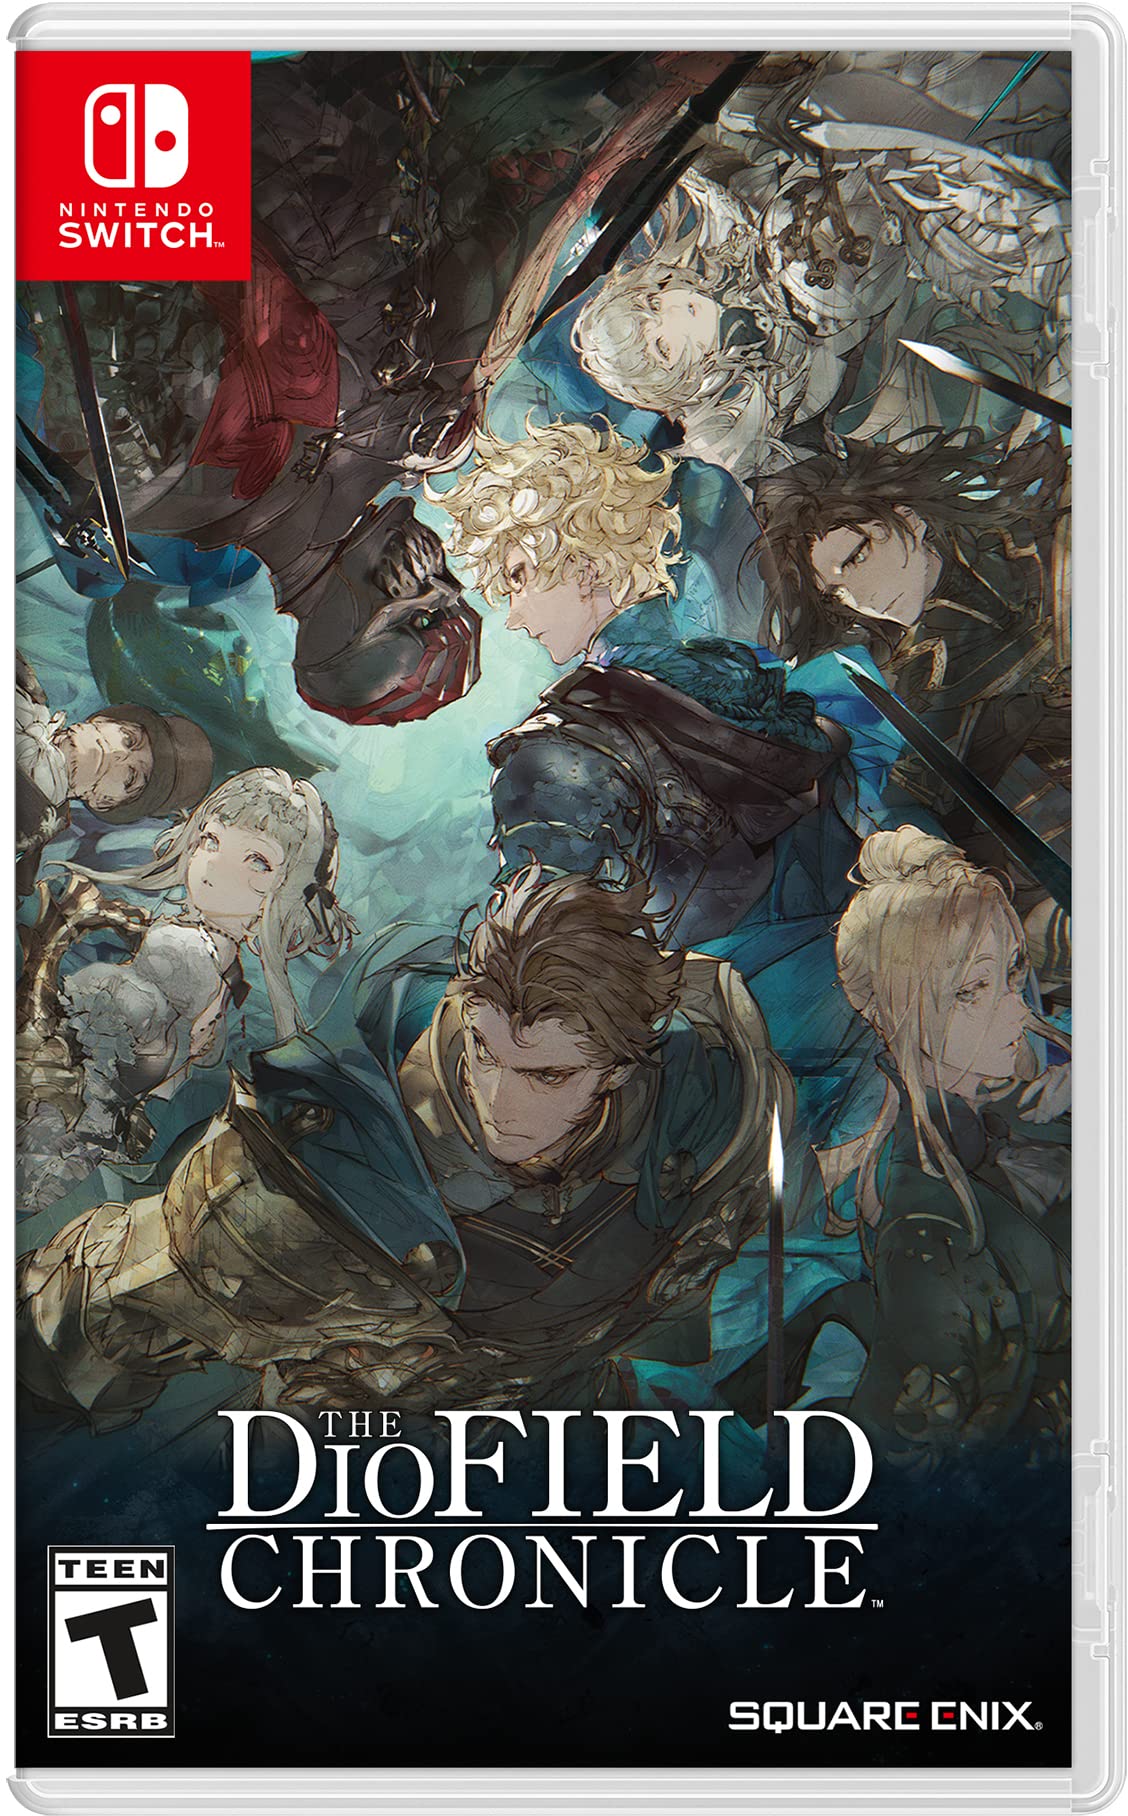 Amazon.com: The Diofield Chronicle - Nintendo Switch : Square Enix LLC: Everything Else $49.99